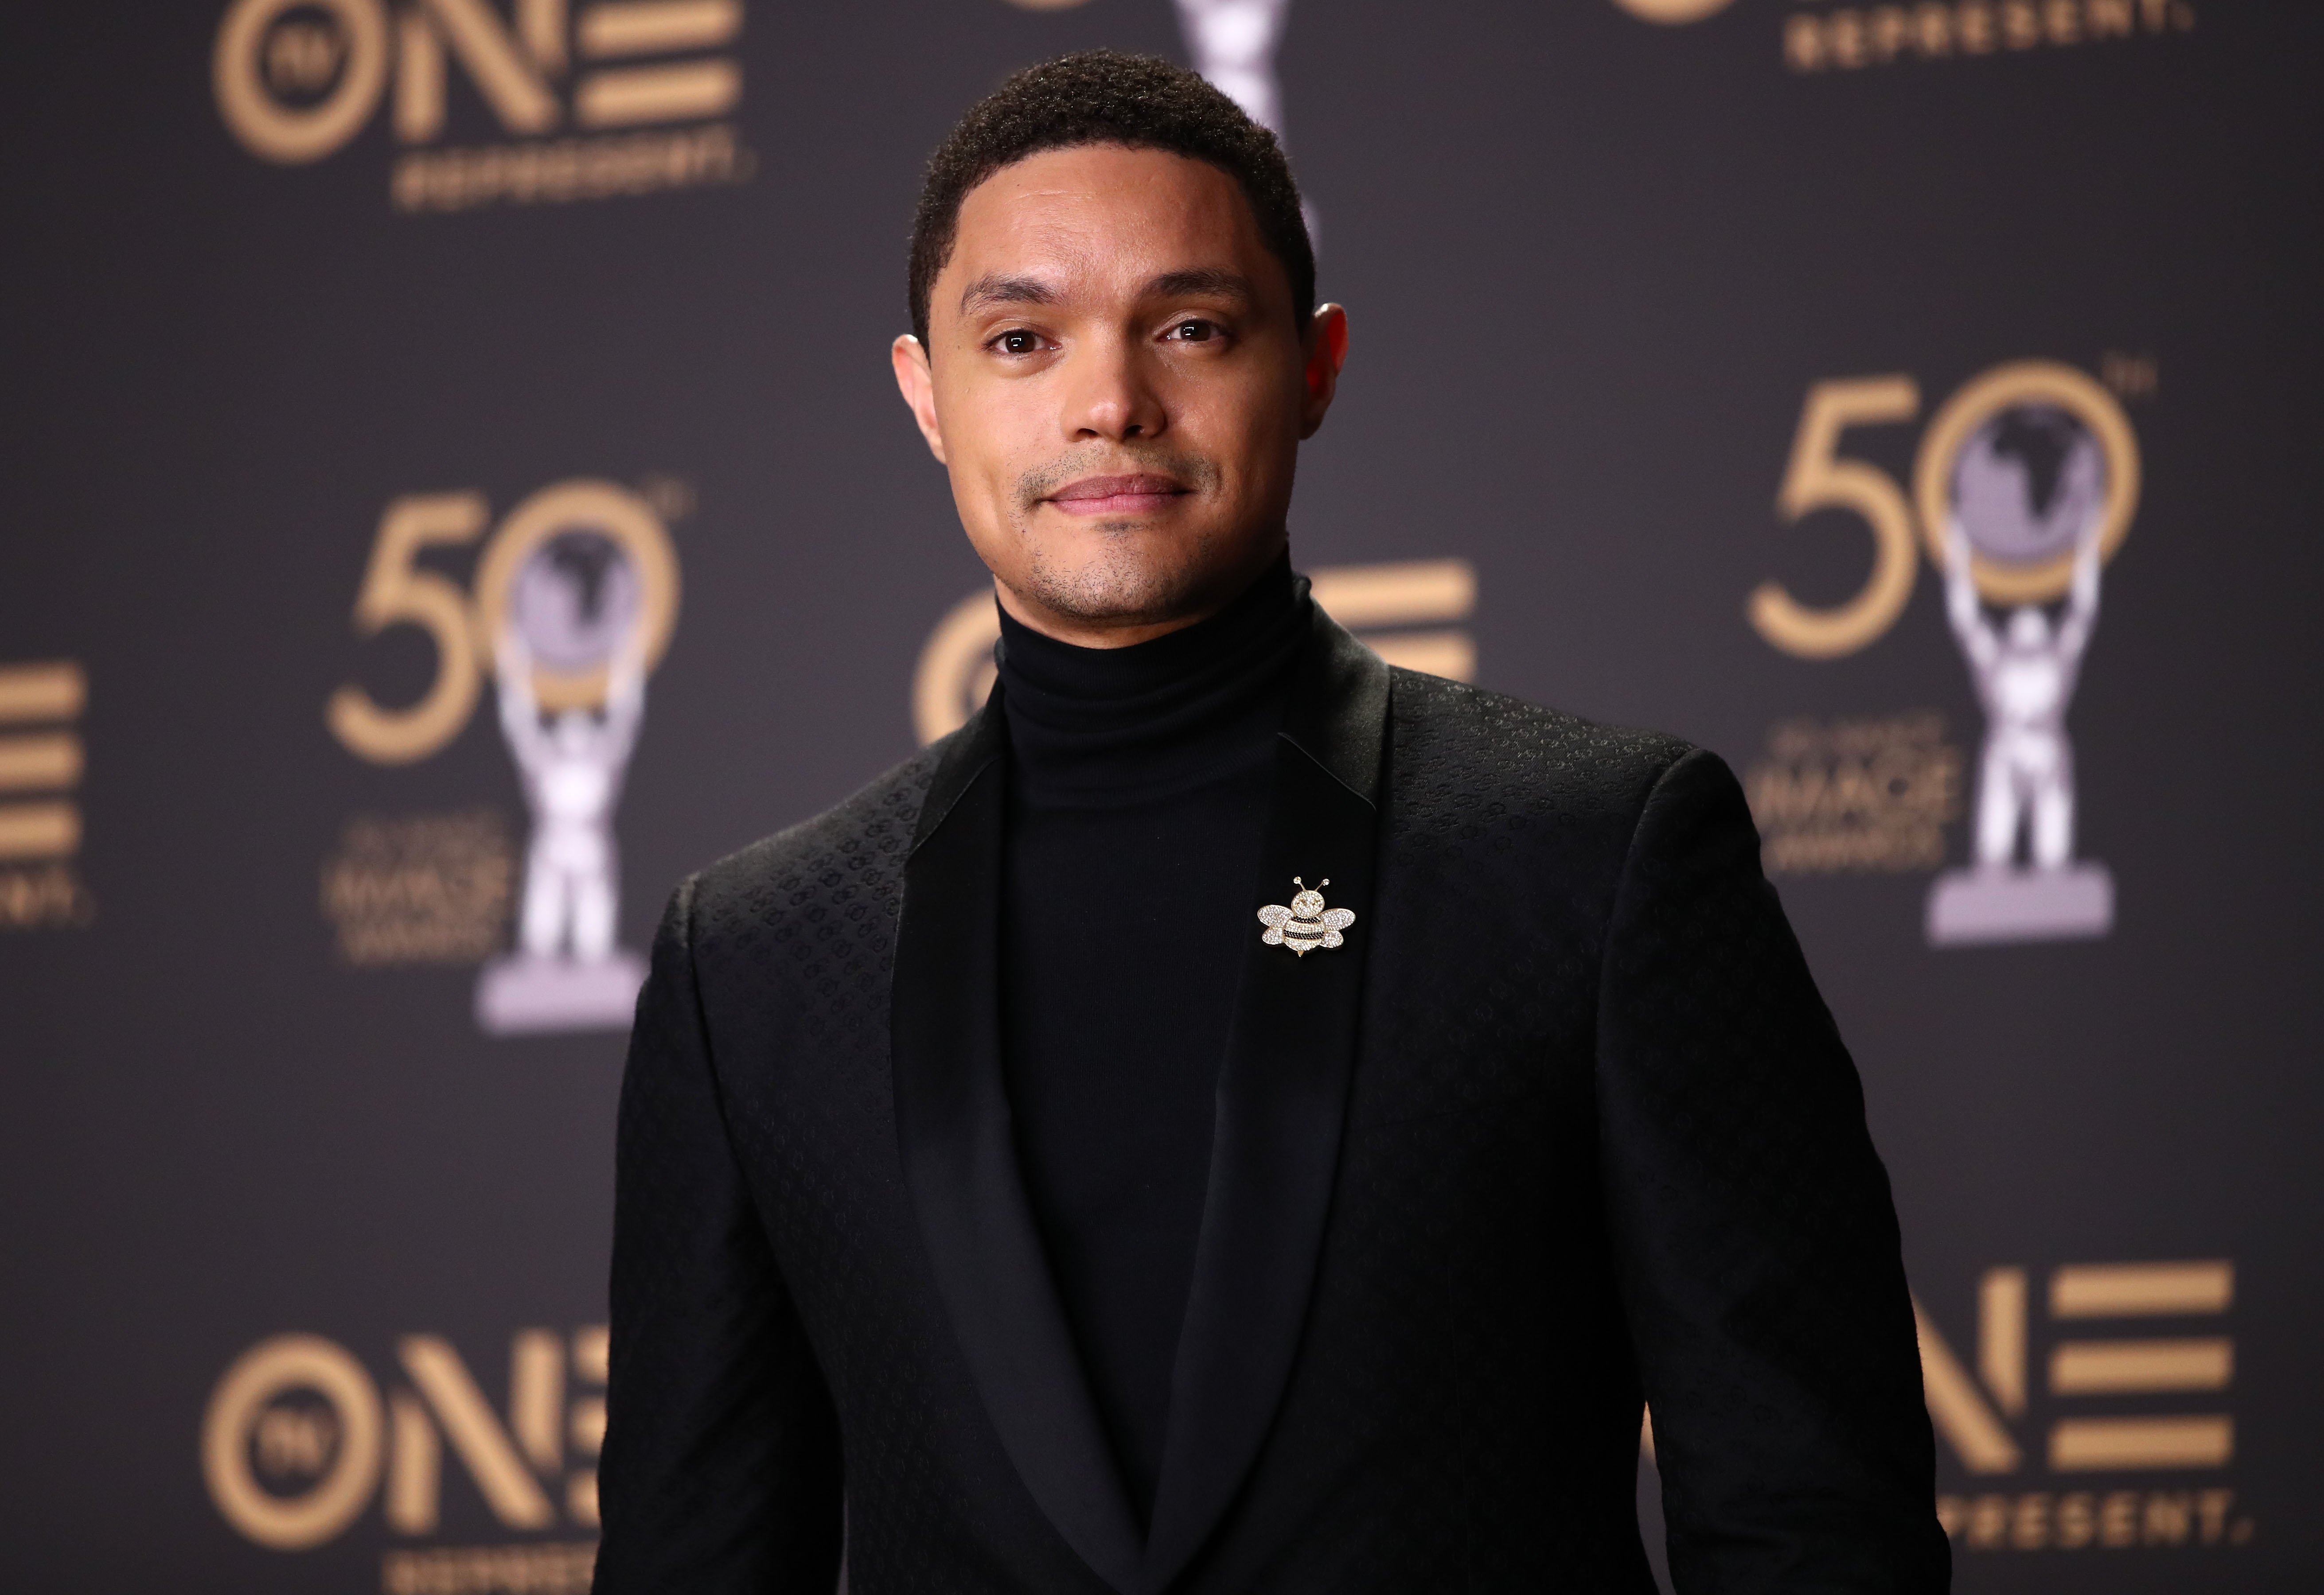 Trevor Noah attends the 50th NAACP Image Awards at Dolby Theatre on March 30, 2019 | Photo: GettyImages